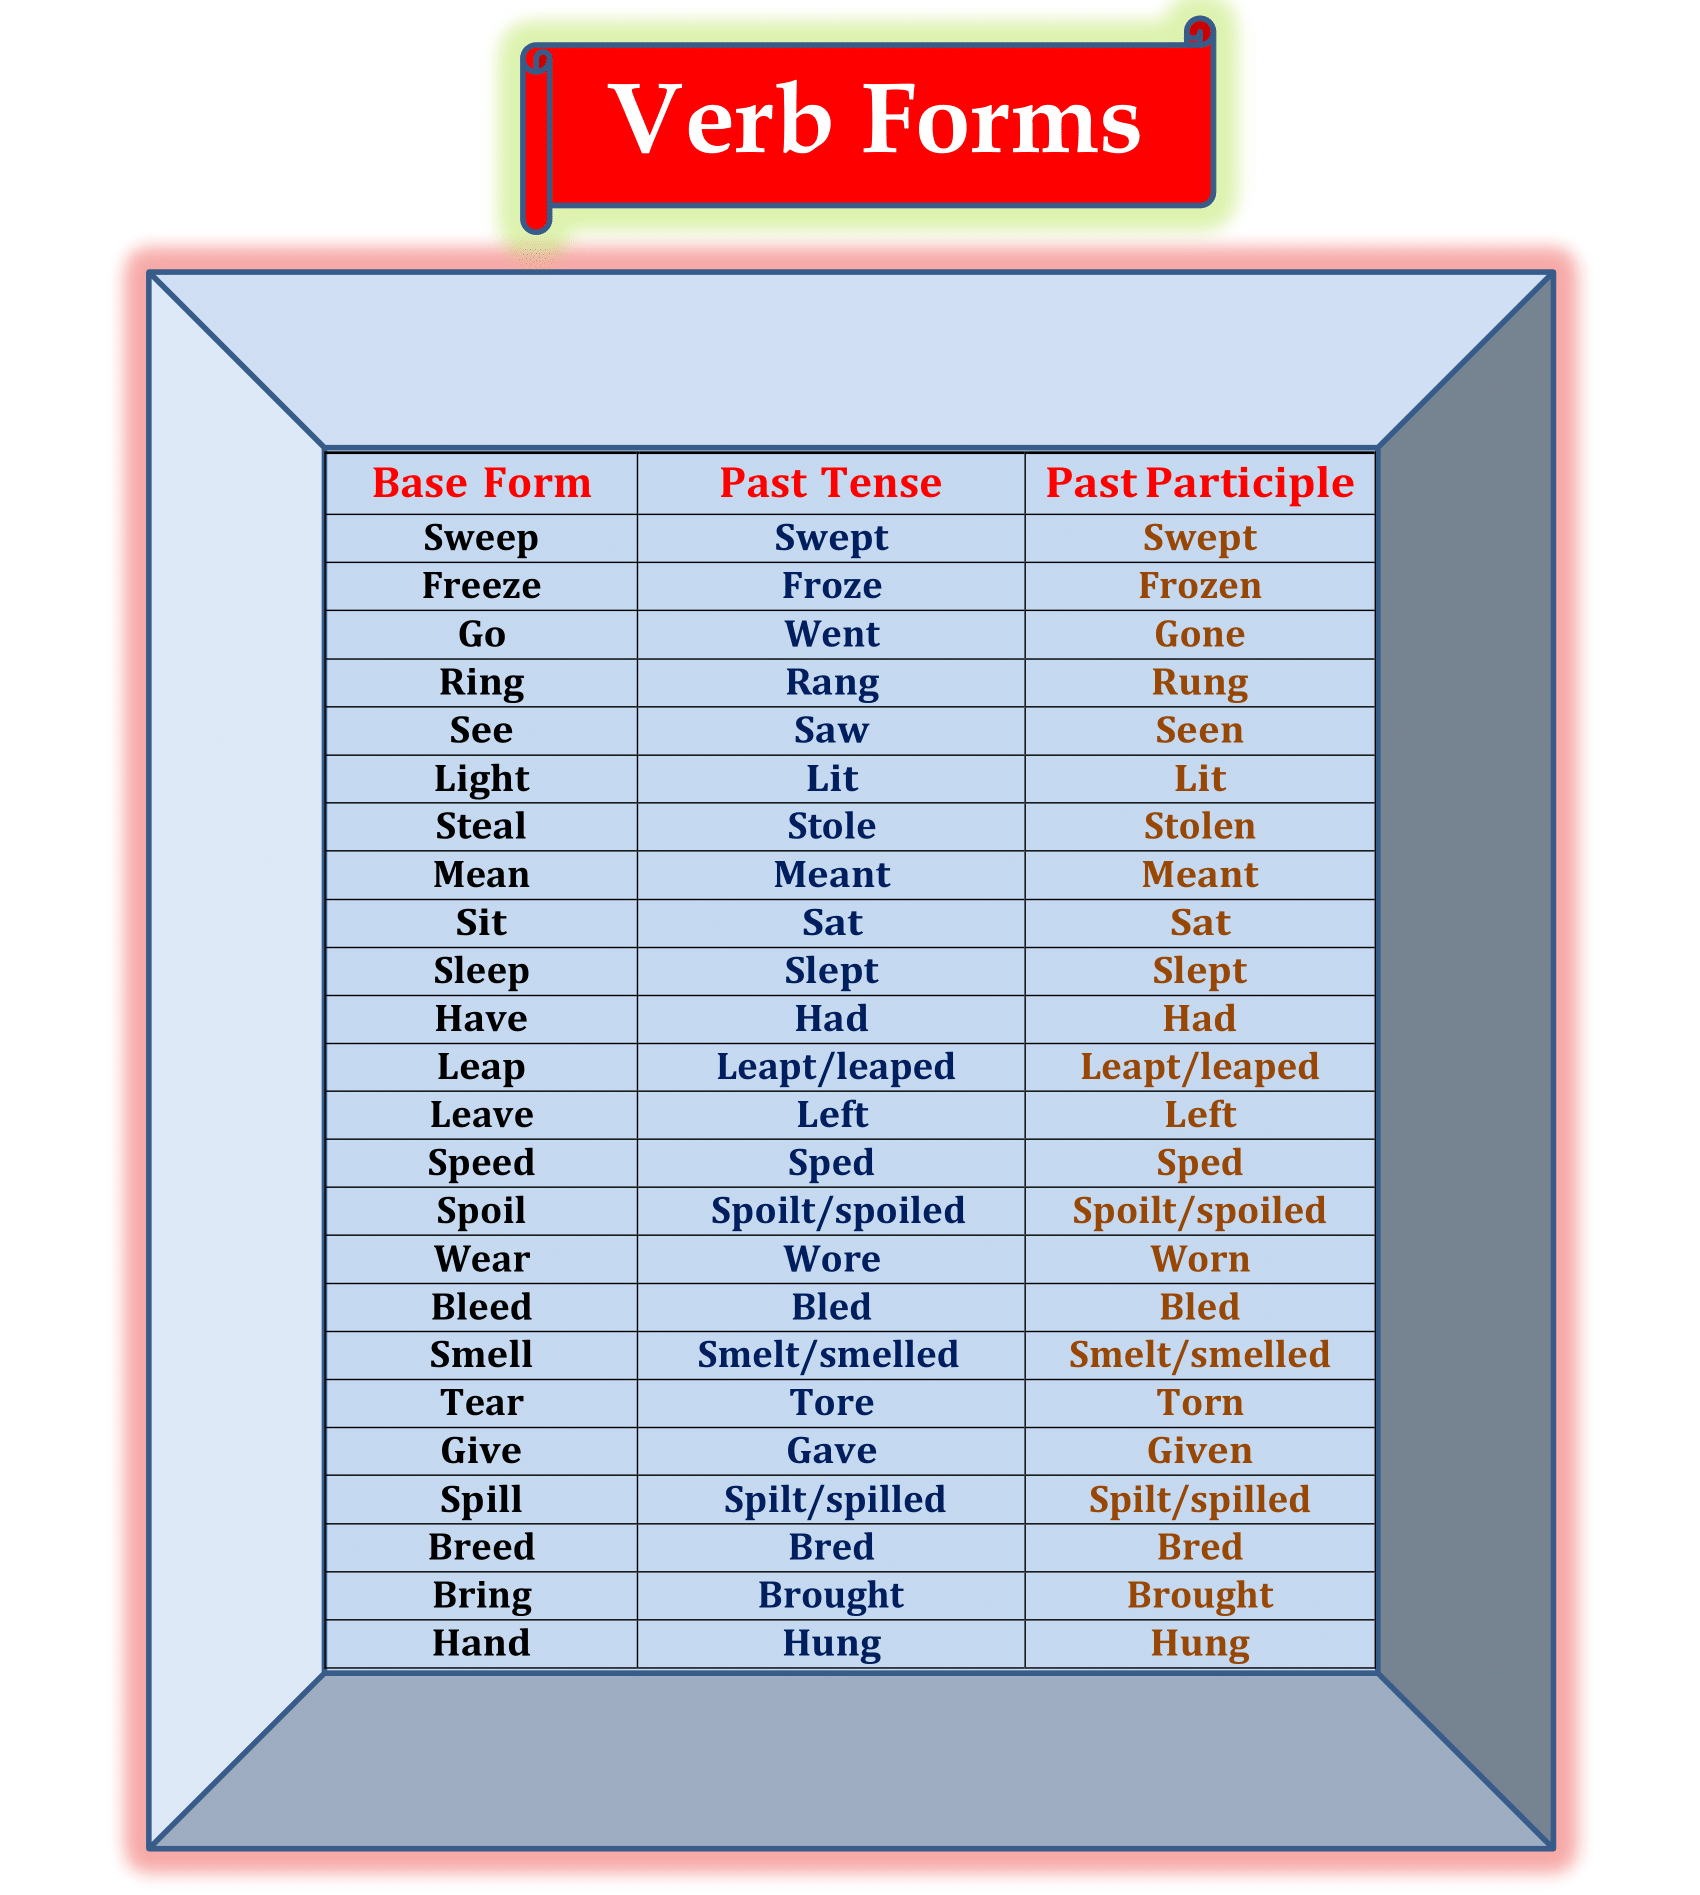 Phone V1 V2 V3, Phone Past and Past Participle Form Tense Verb 1 2 3 -  English Learn Site